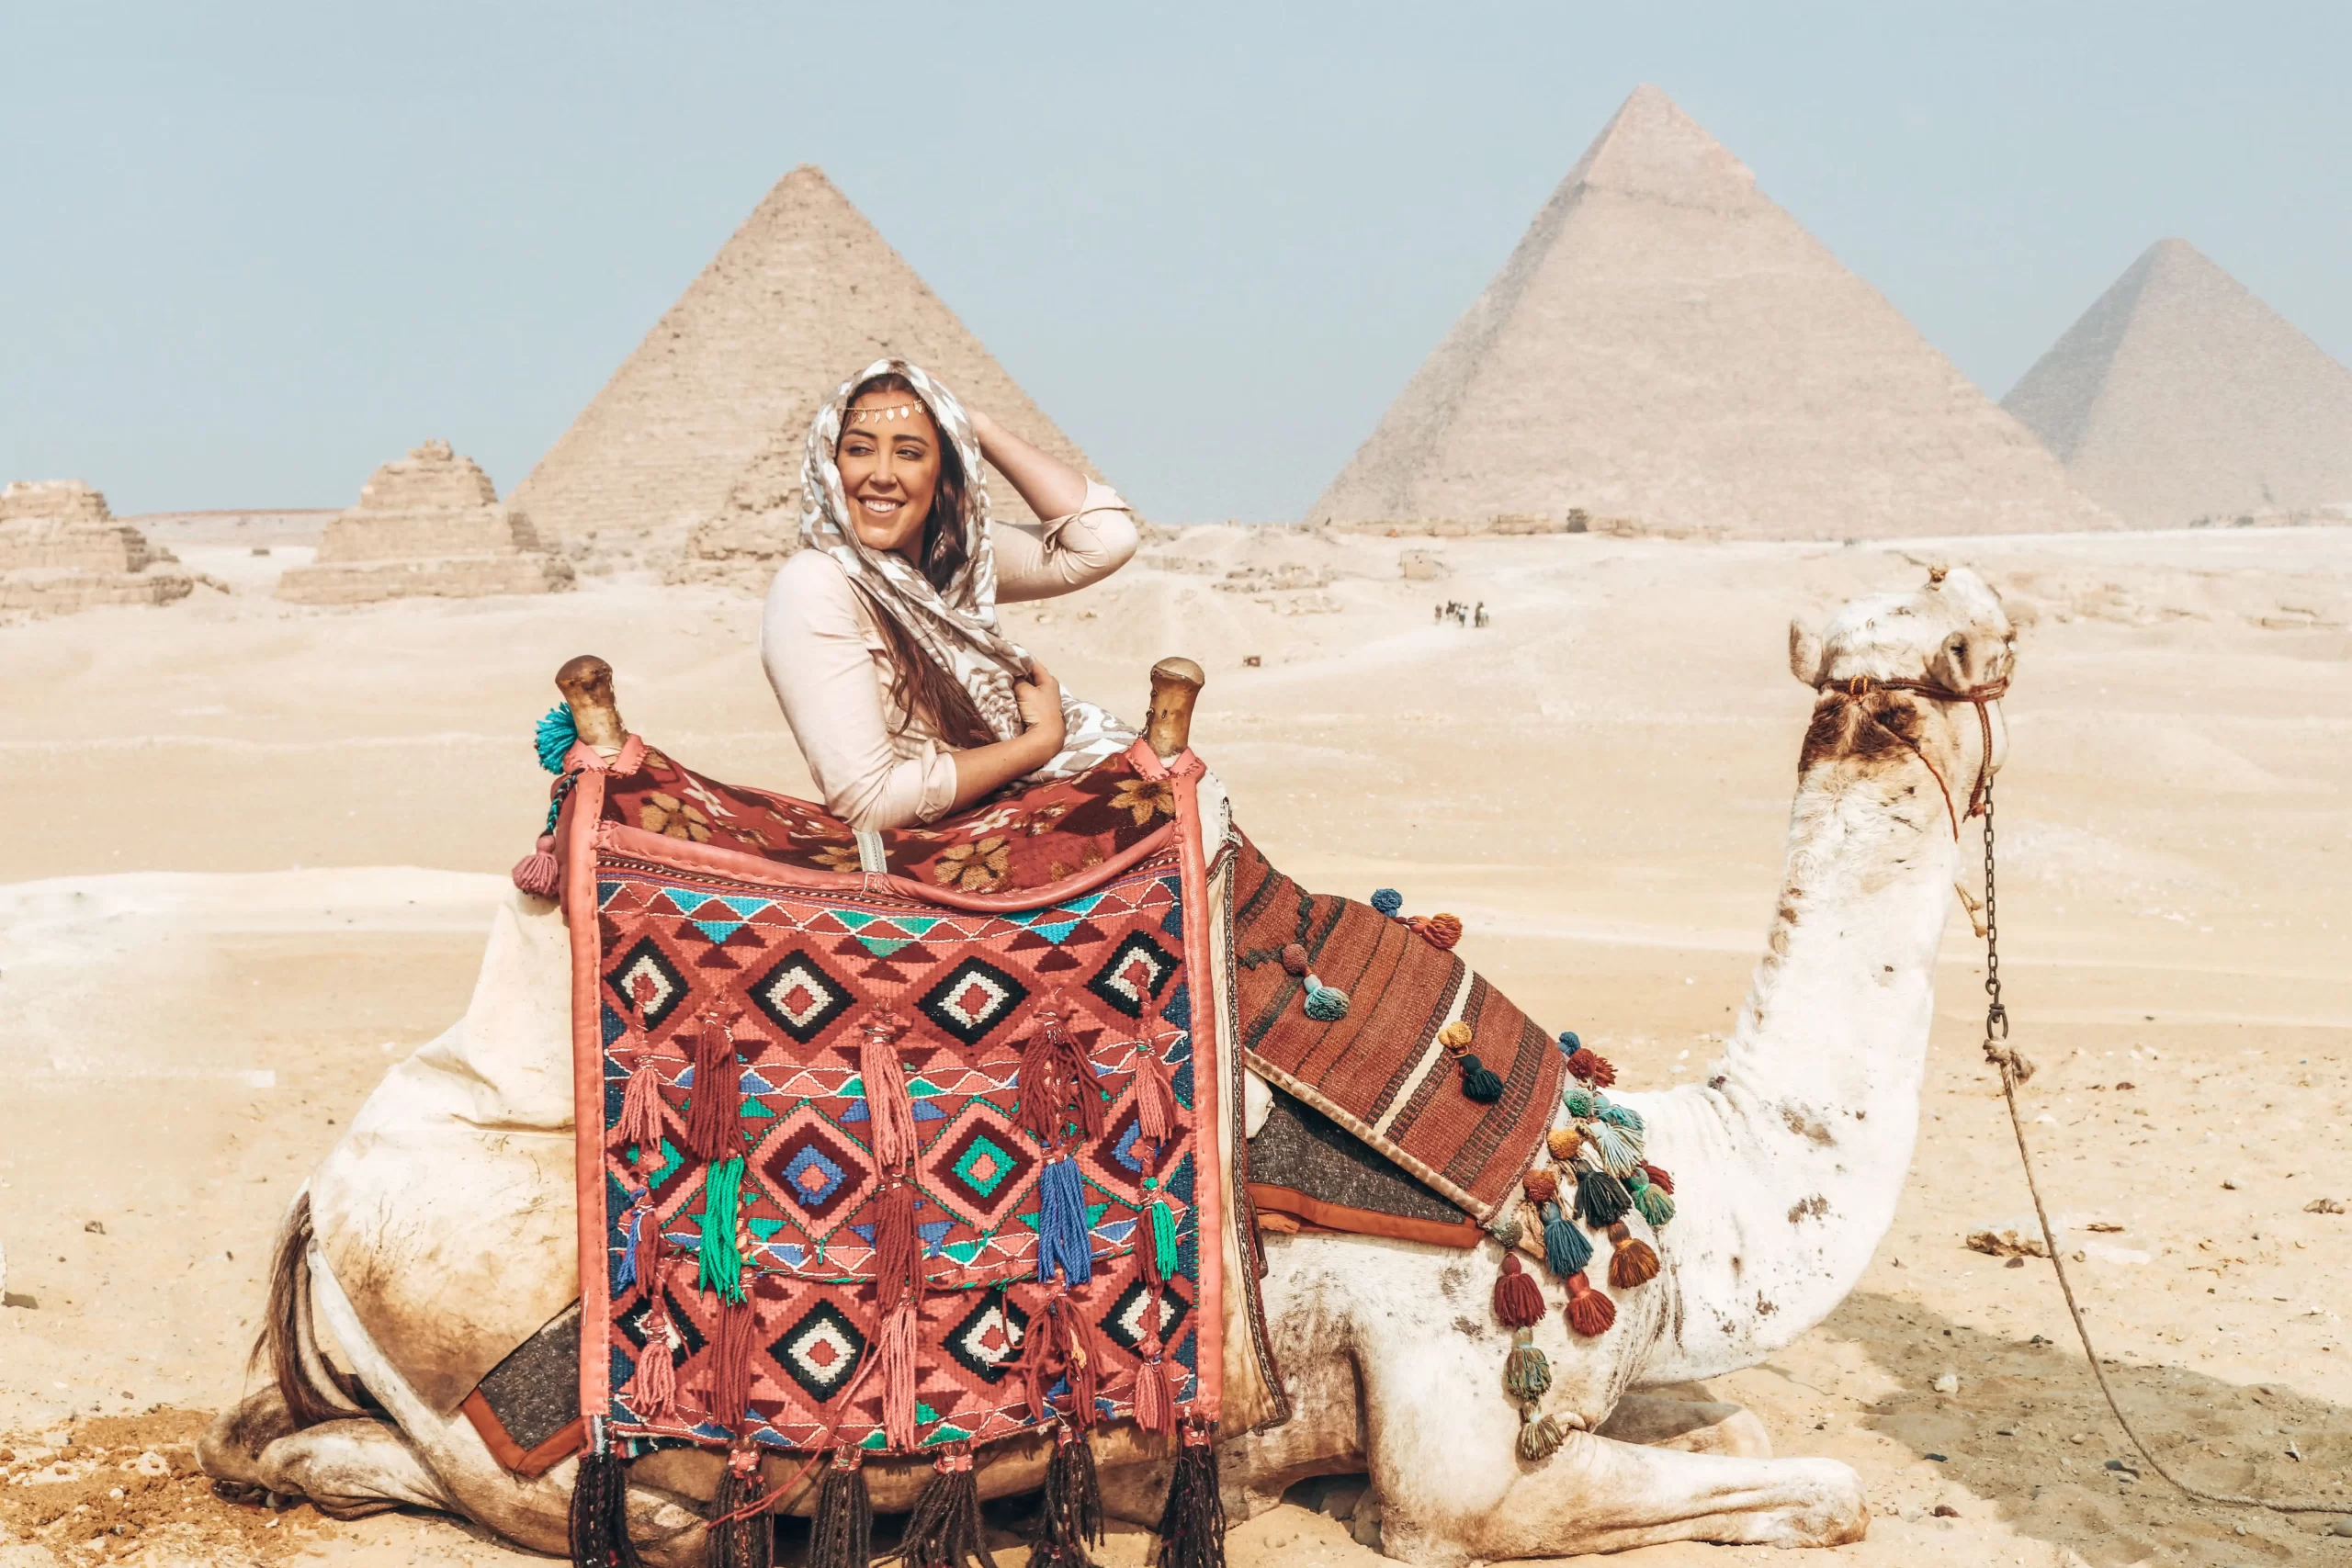 1 Day Trip from Luxor to Cairo by Plane